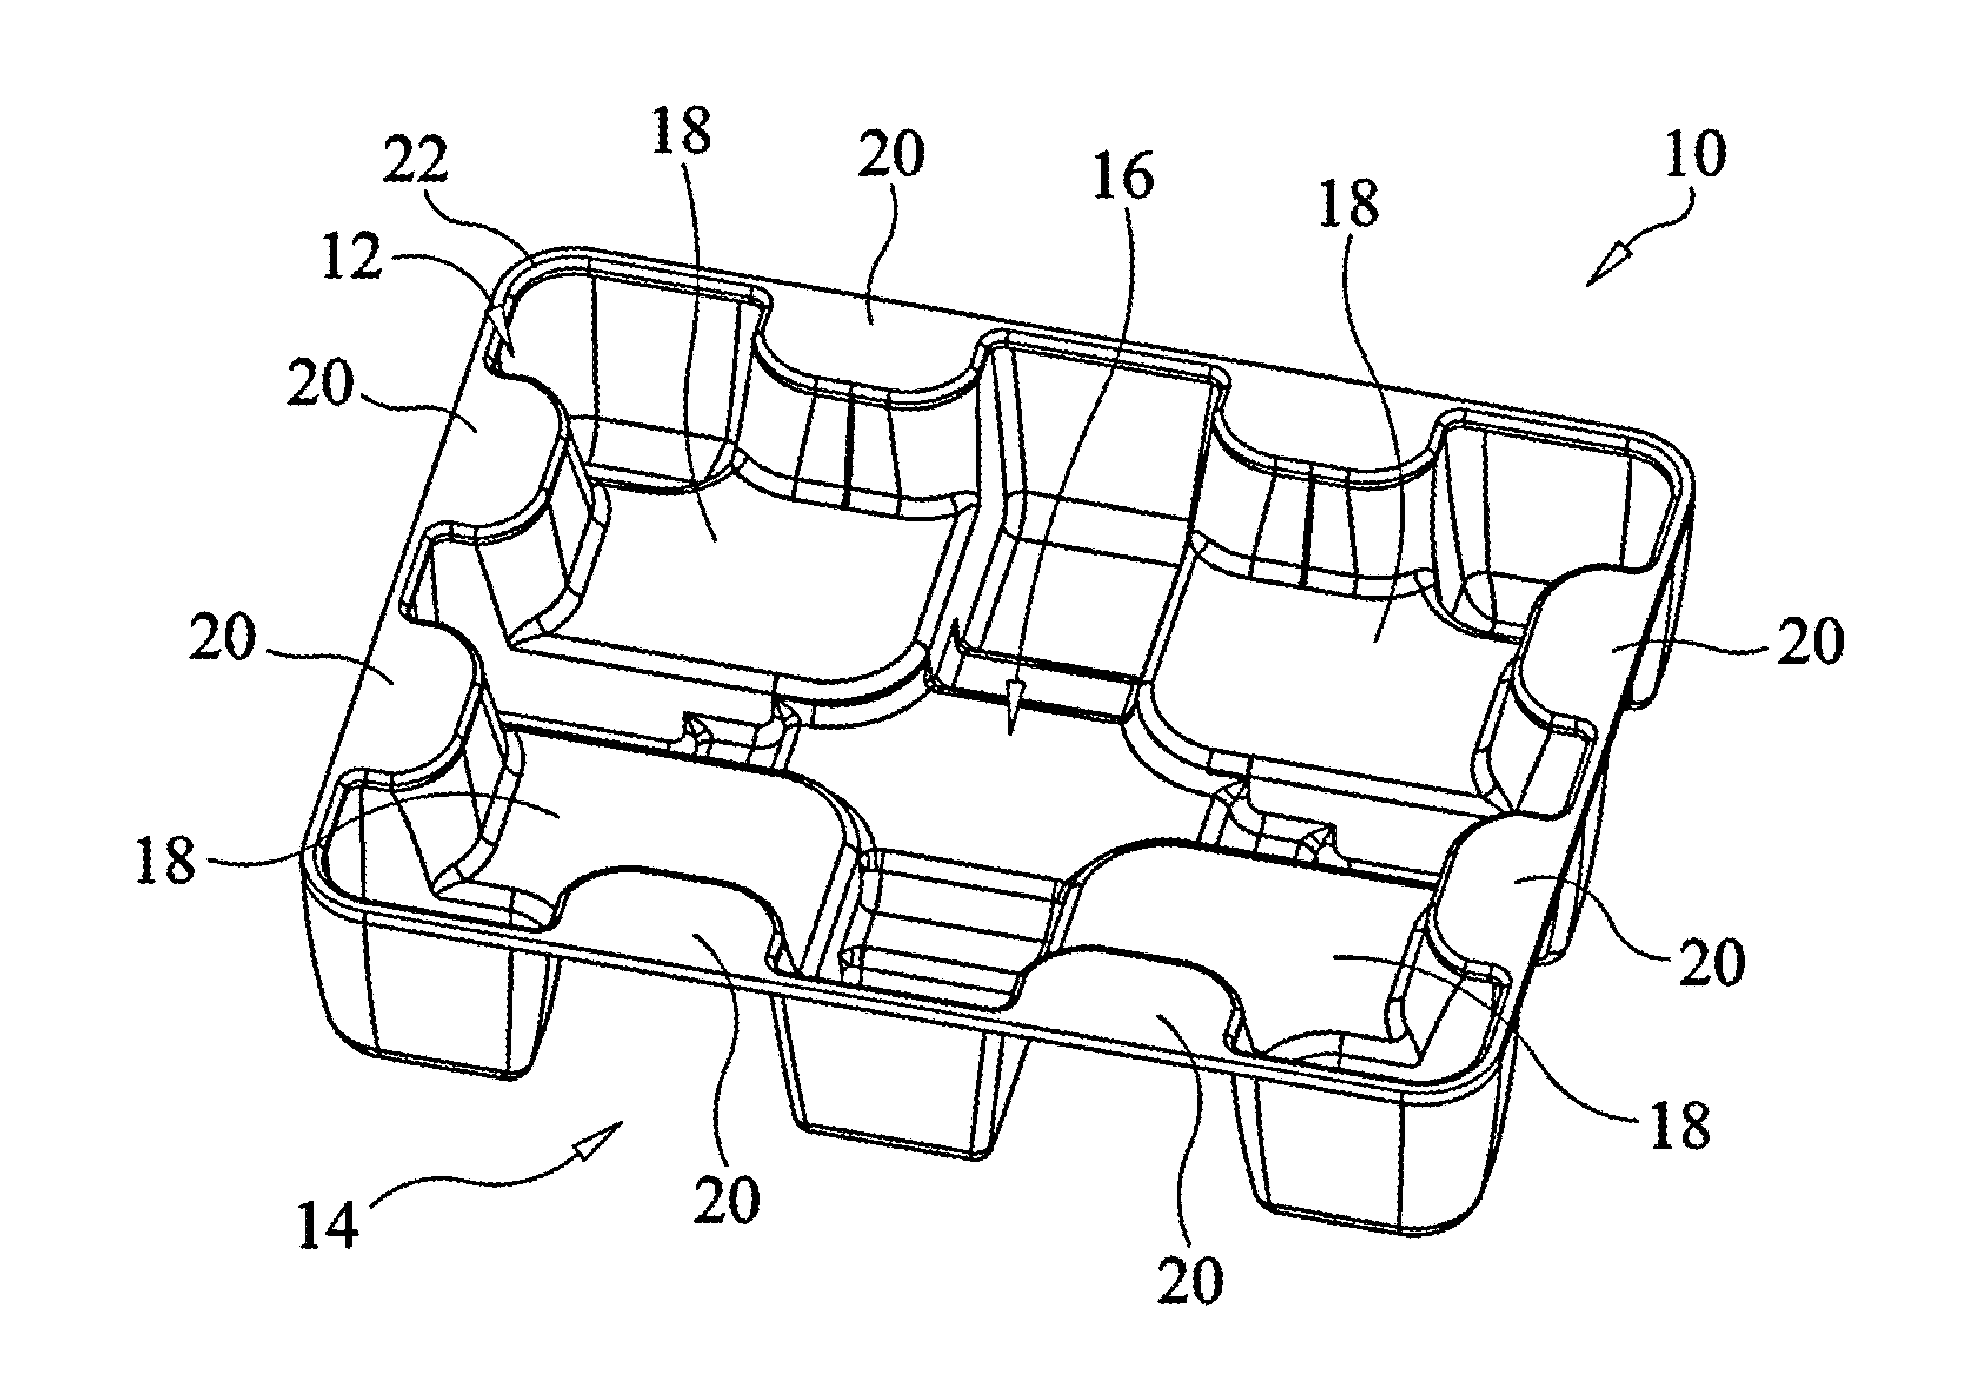 Apparatus, Systems and Methods for Packaging Electronic Products